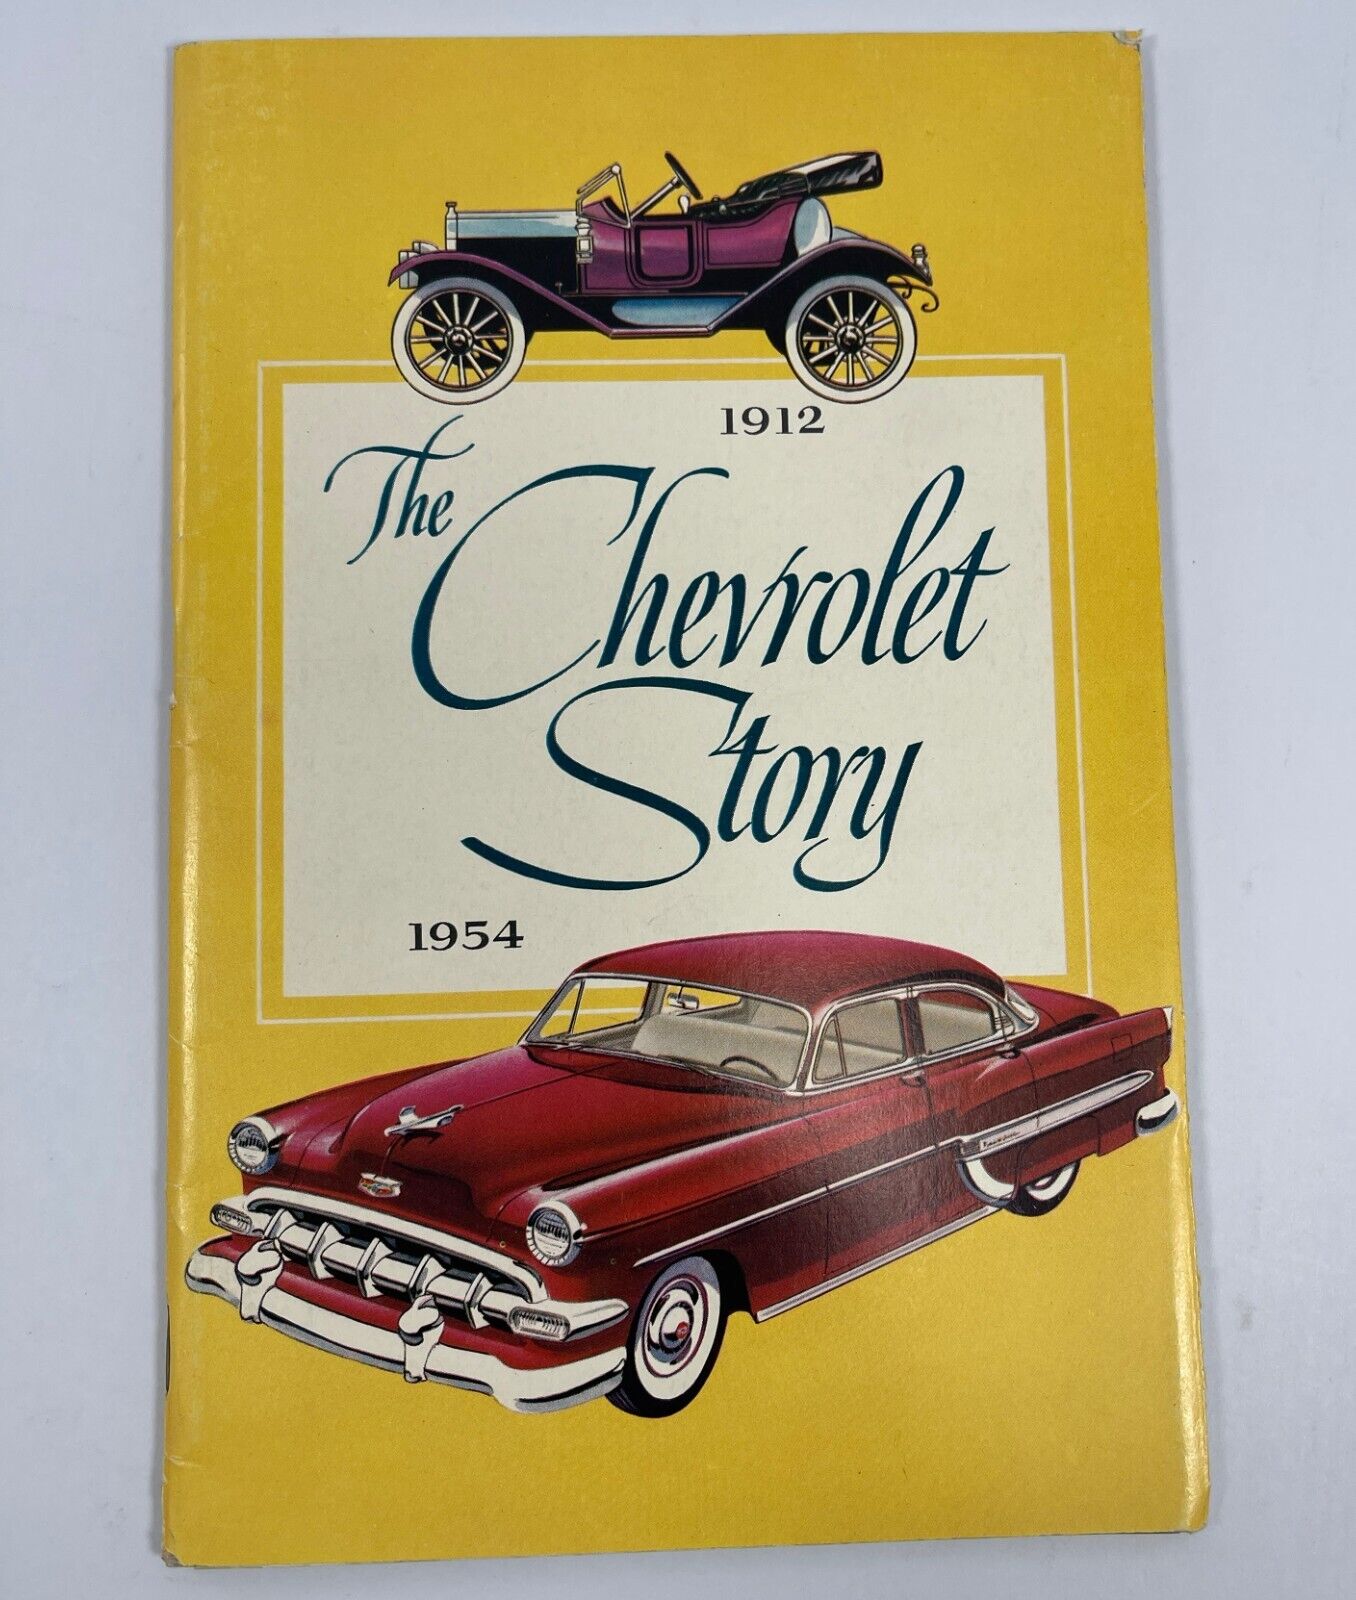 Original 1912 - 1954 The Chevrolet Story History Brochure Booklet 54 Chevy